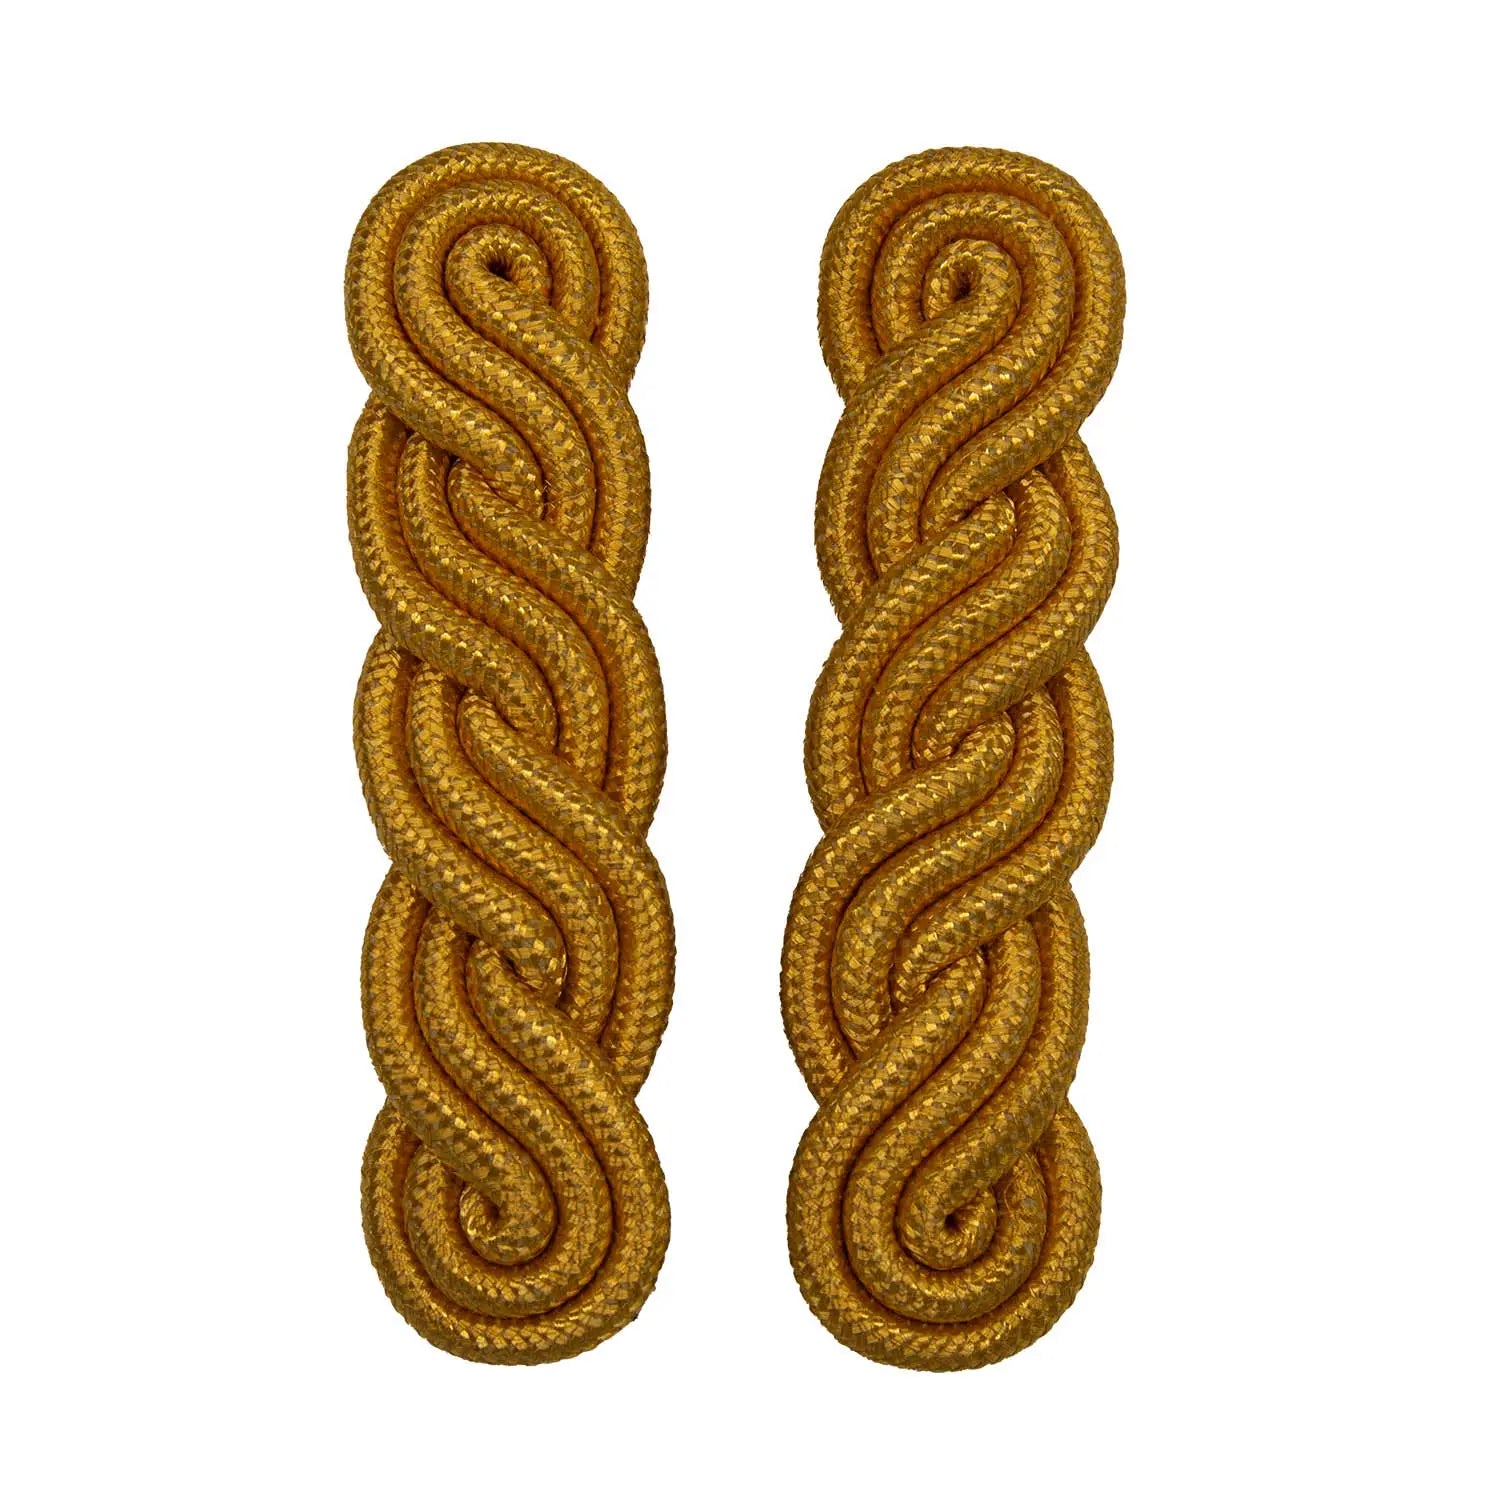 Shoulder Cord: 2723 Interwoven Gold - Thick